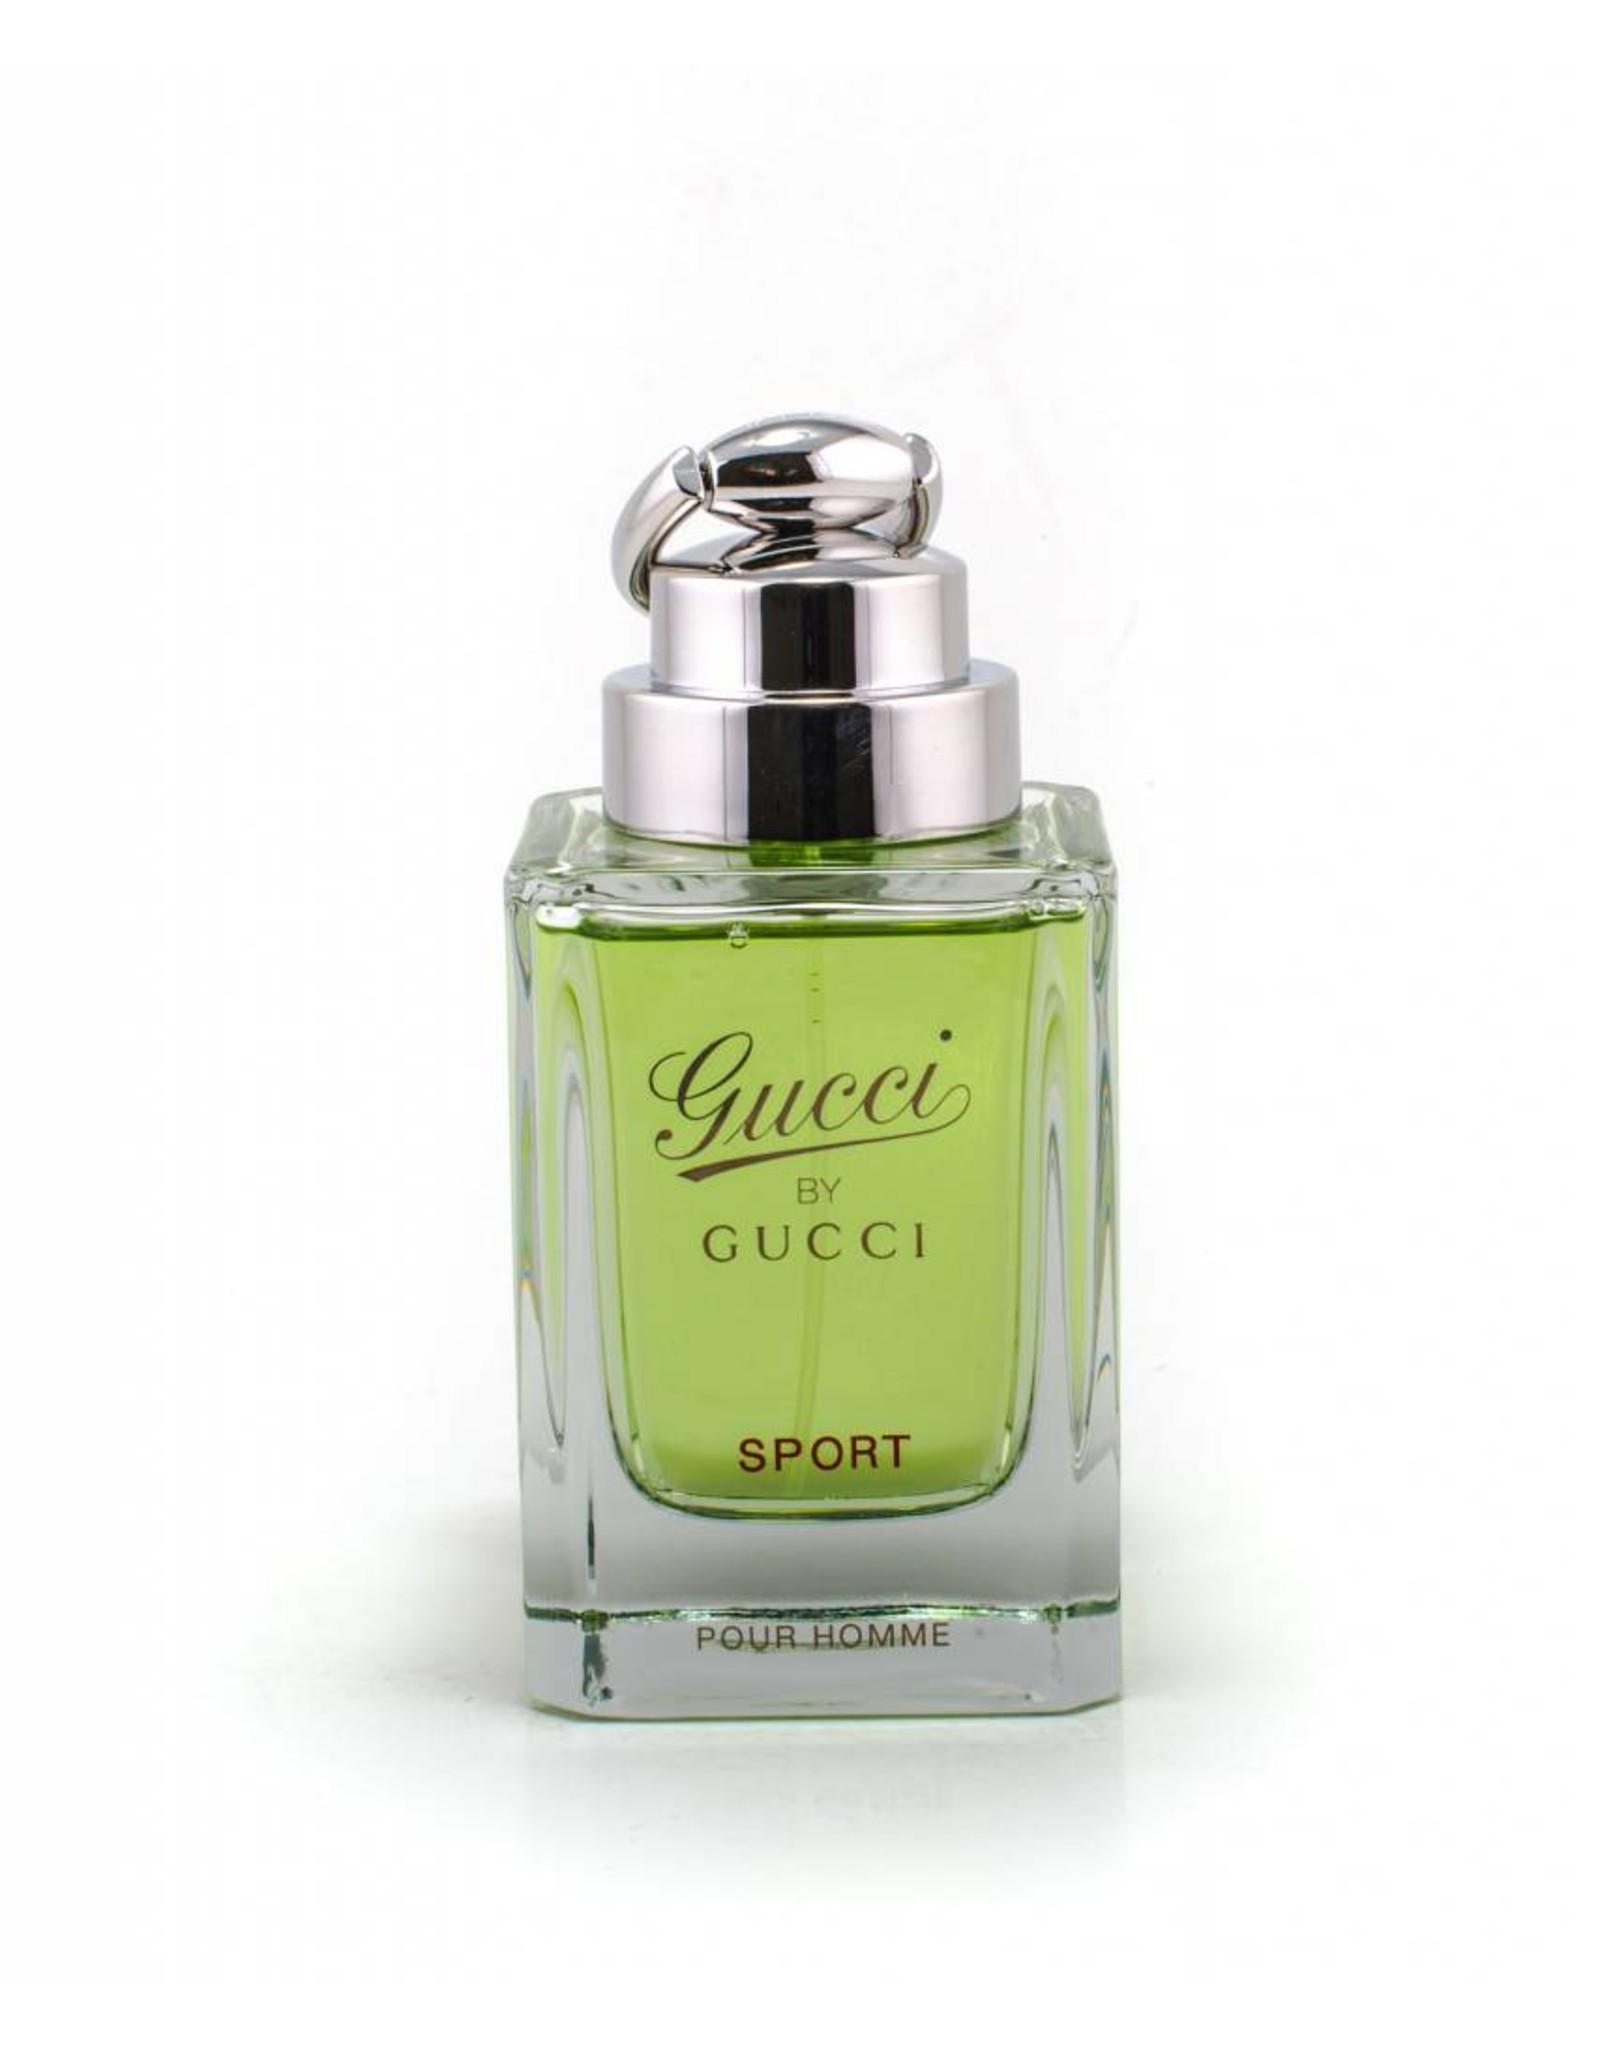 GUCCI GUCCI BY GUCCI SPORT POUR HOMME